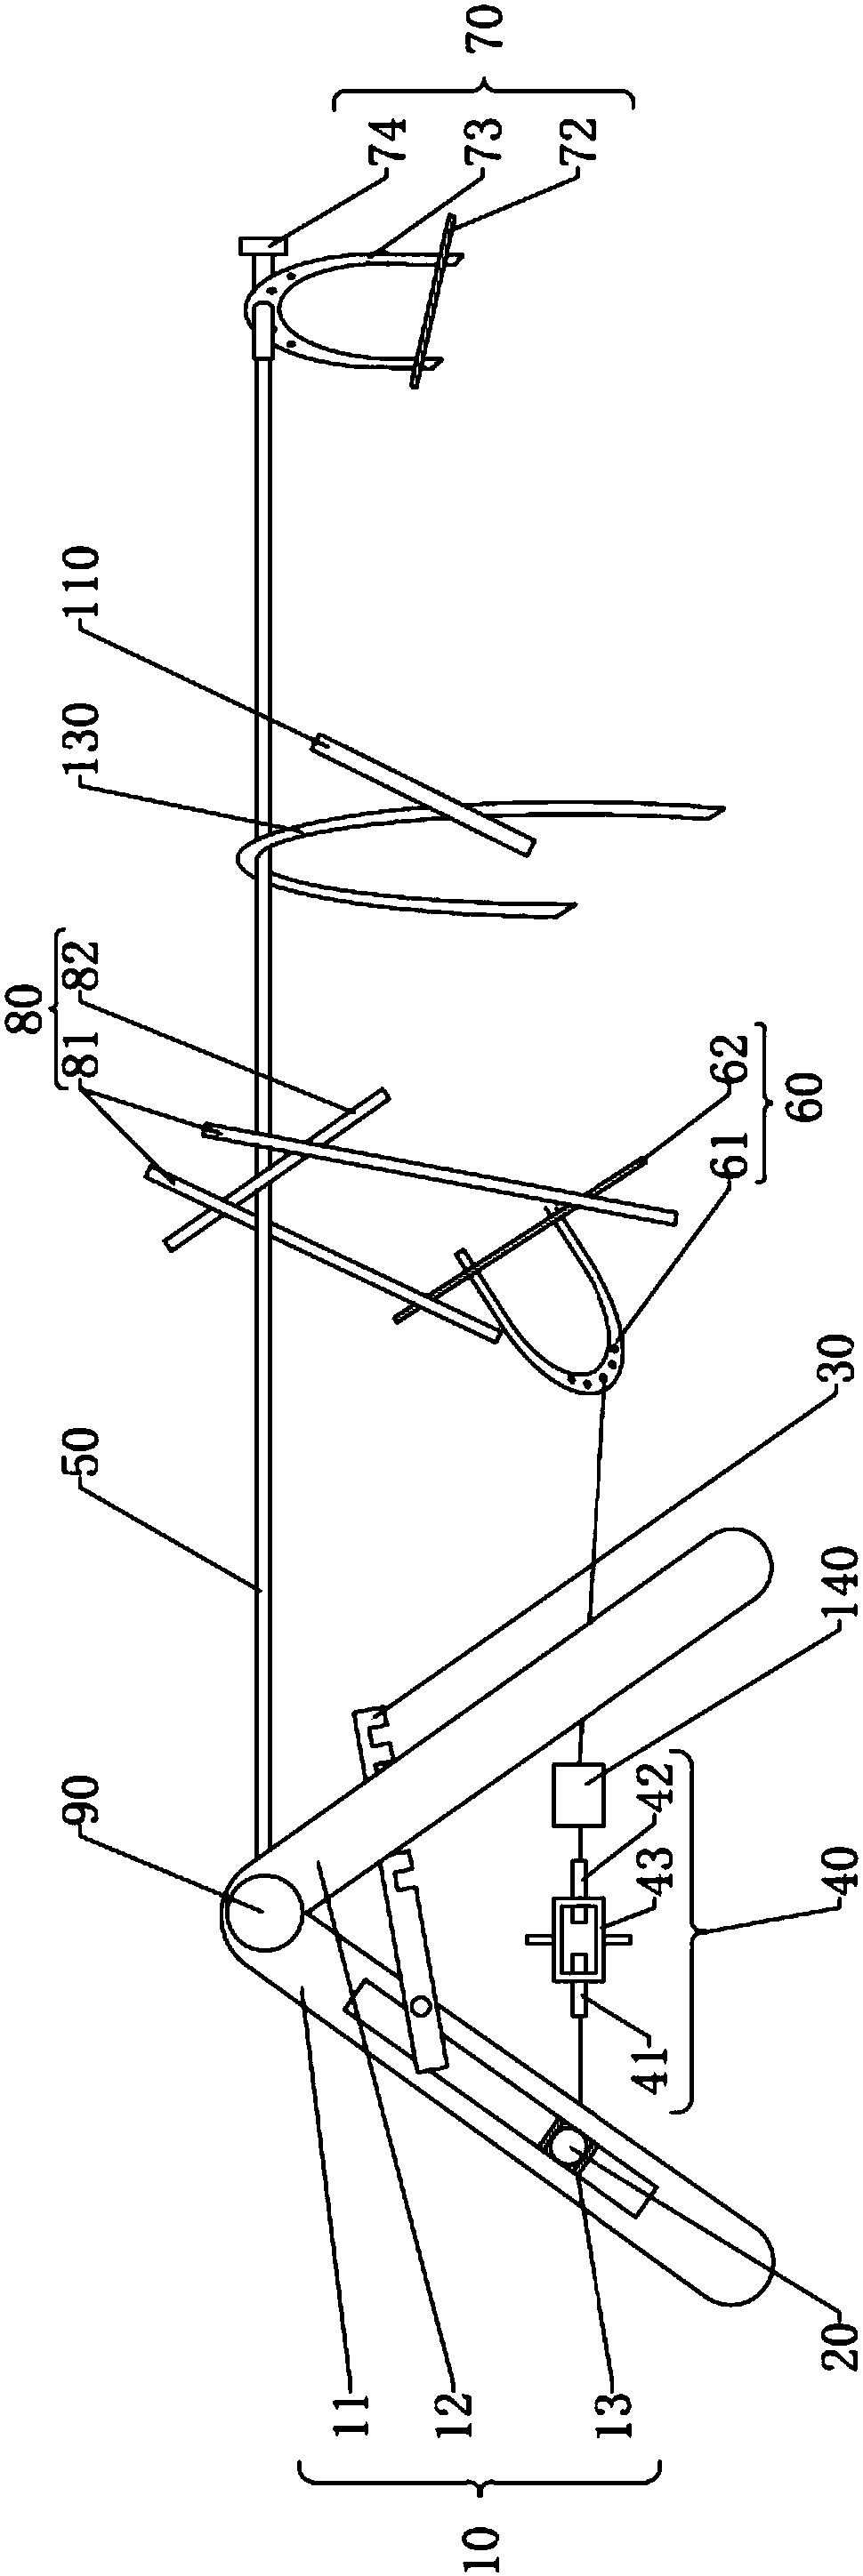 Skeletal traction reposition fixing device and method for treating limb fractures